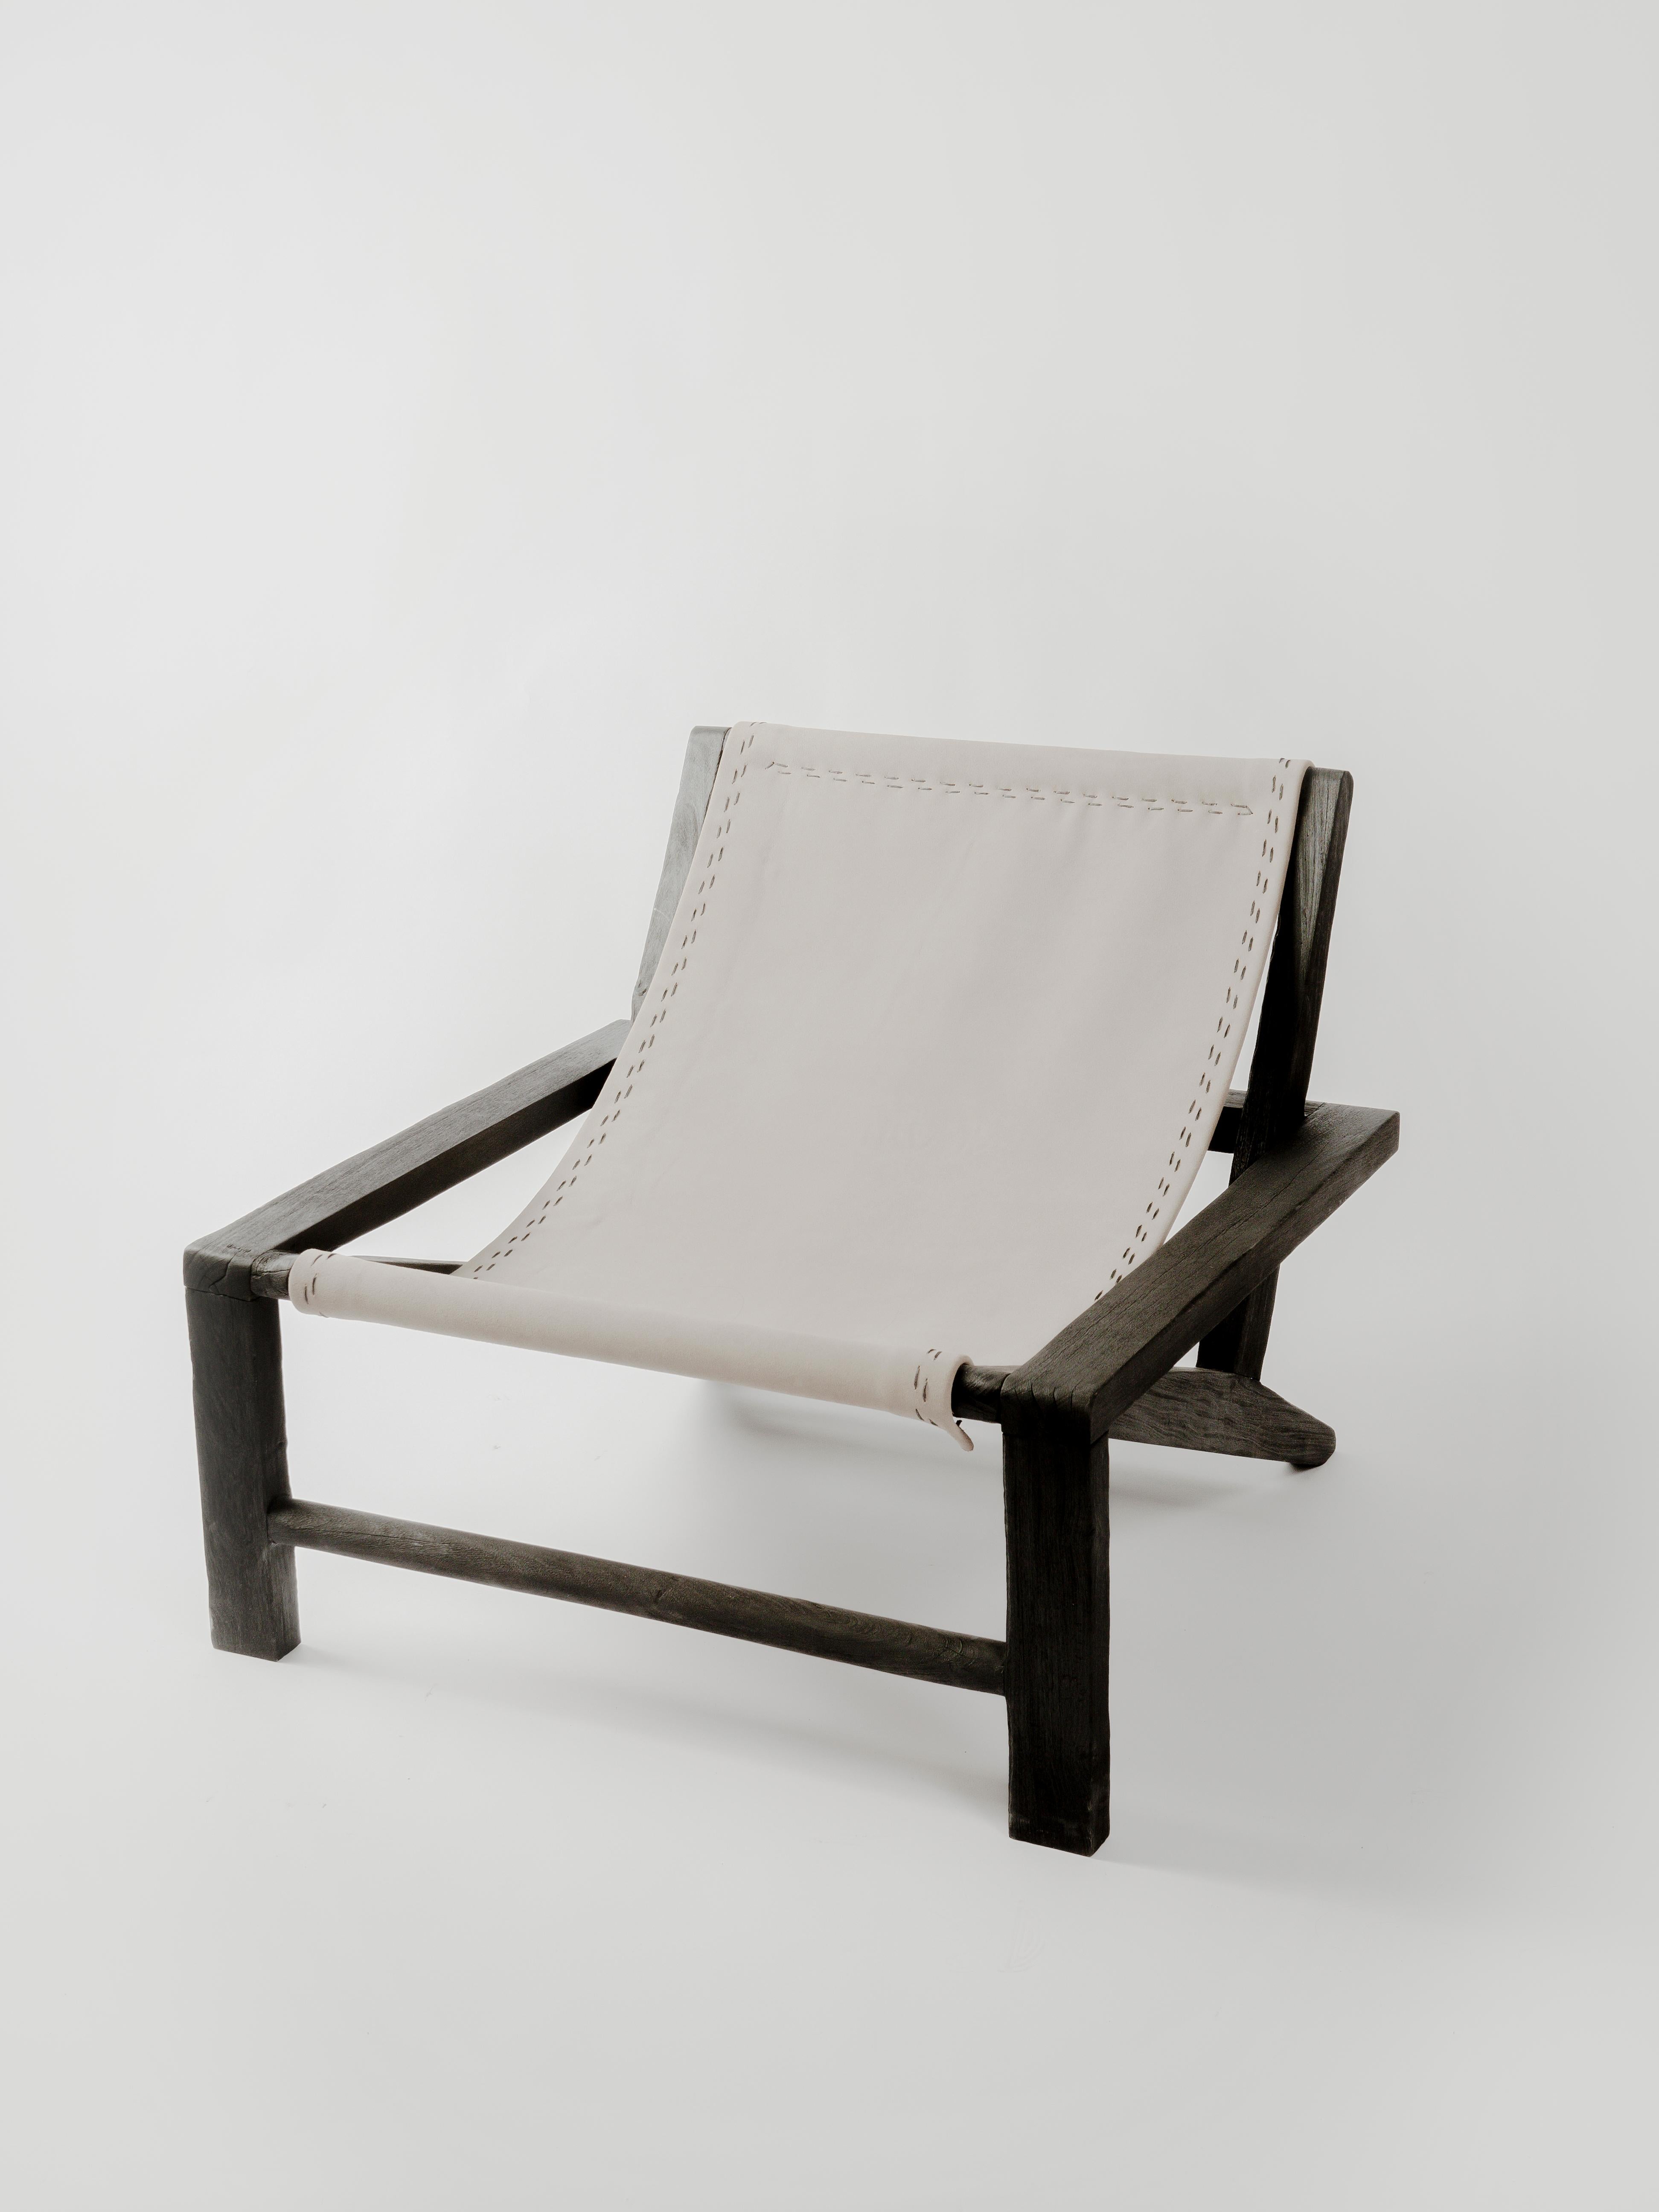 Armchair 02 by Daniel Orozco
Material: Burned wood armchair with gray leather seat.
Dimensions: D 75 X W 62  X H 62 cm

Burned wood armchair with gray leather seat. Handmade by Mexican artisans.

Daniel Orozco Estudio
We are an inclusive interior